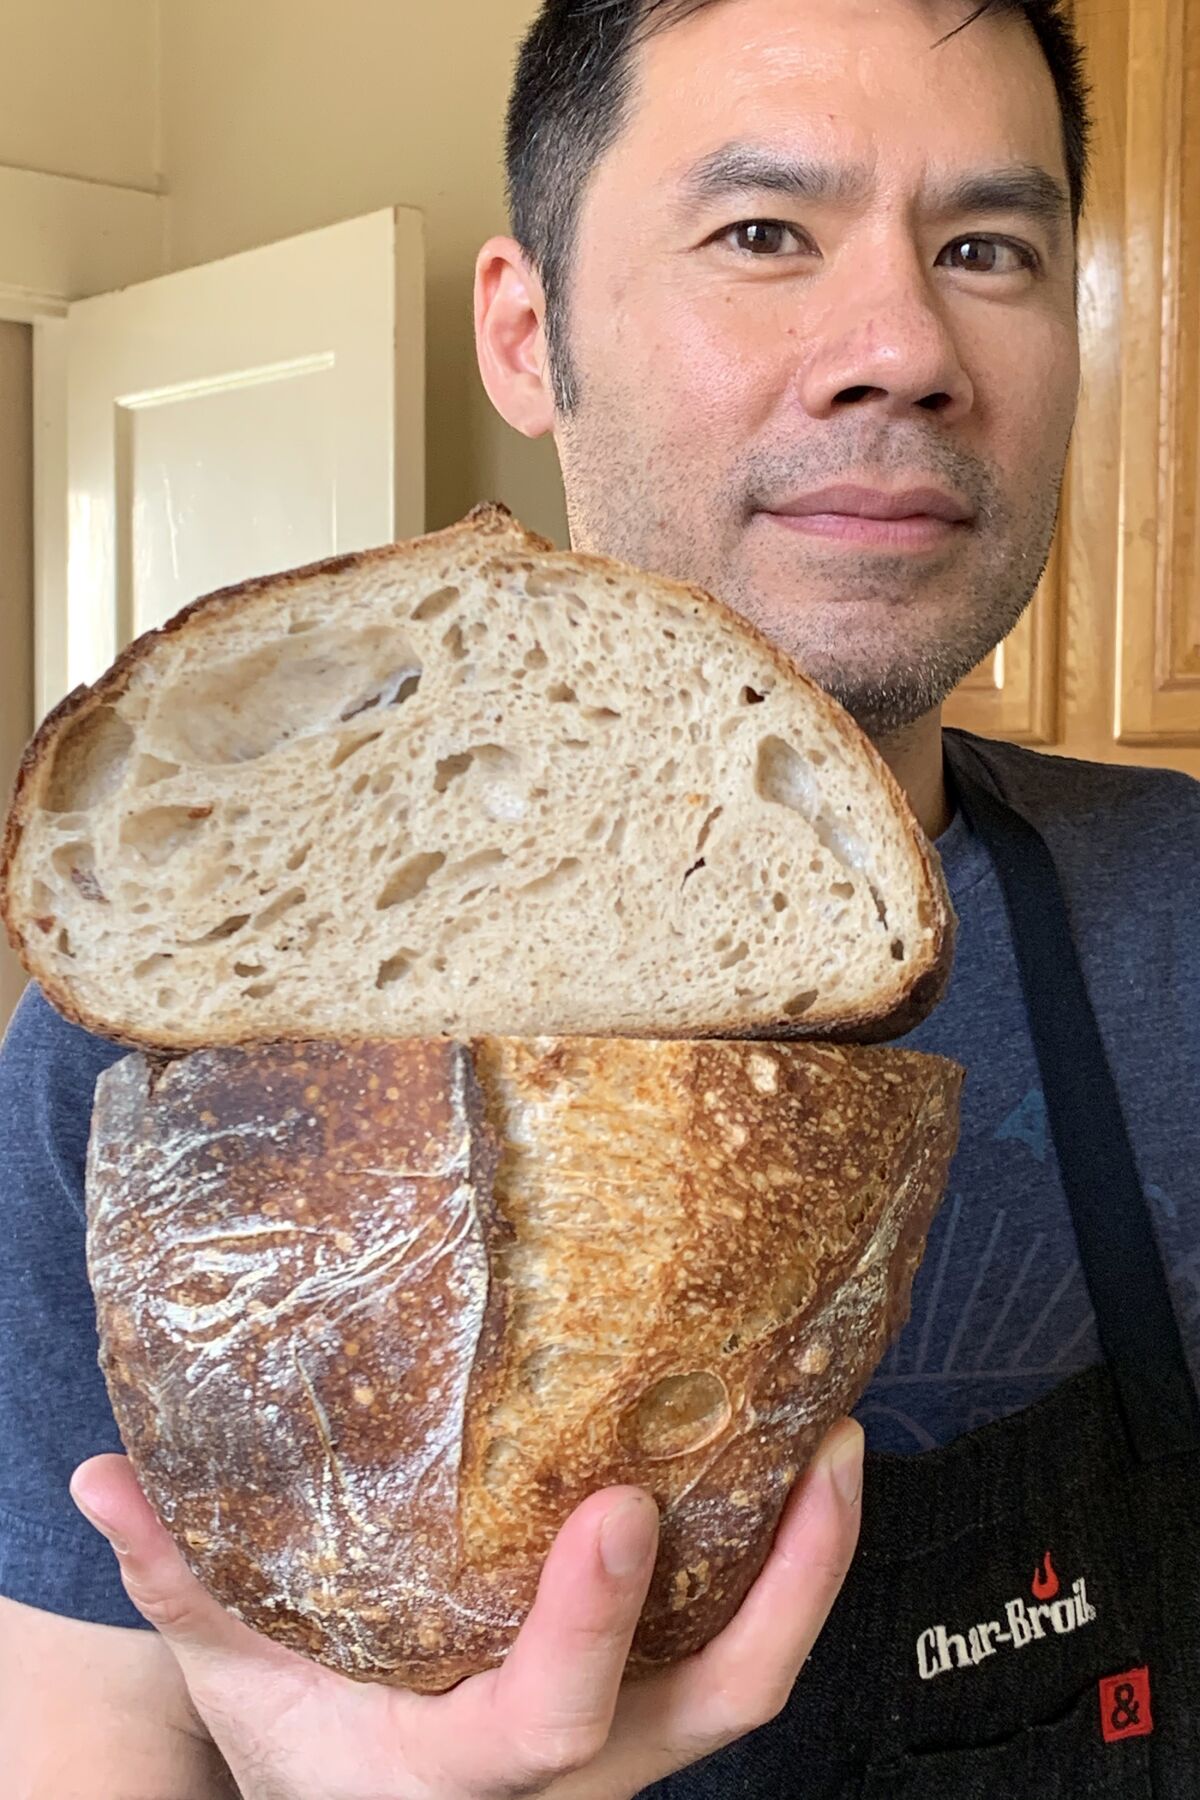 A man holds up a loaf of his sourdough bread, with the top portion sliced open to show the interior texture.